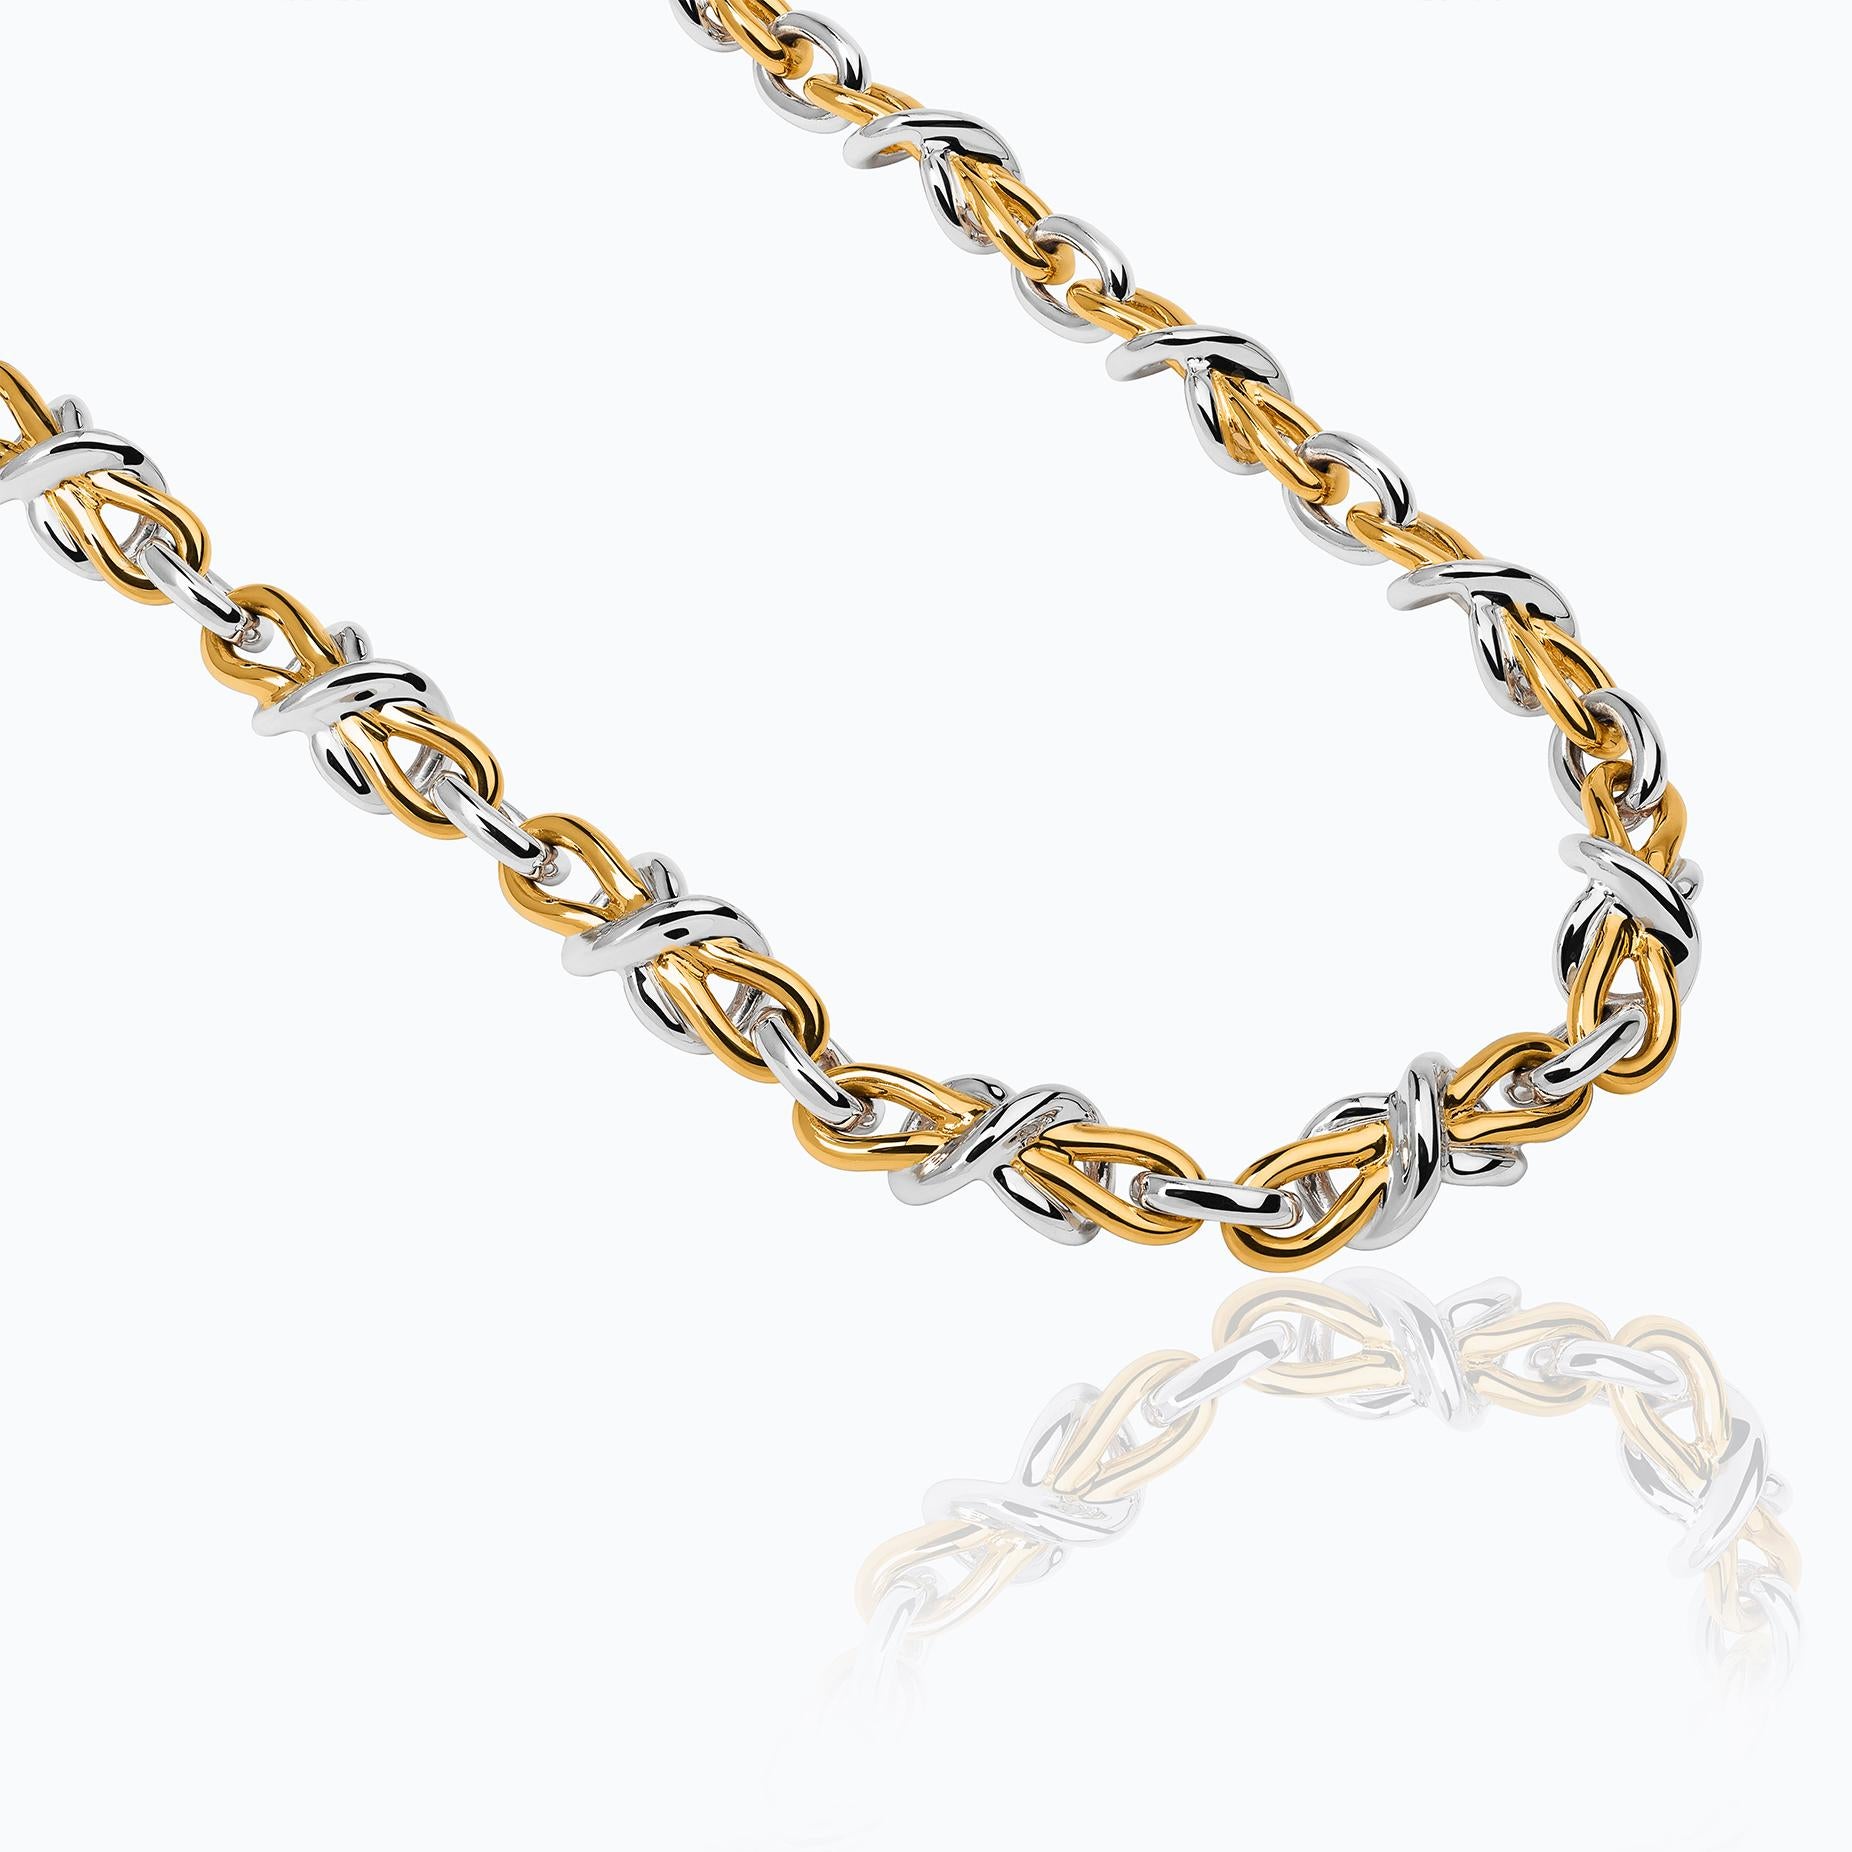 The Herencia Bow Choker is part of a numbered limited edition of 80 units, made of sterling silver with 23 karat yellow gold vermeil. The choker is made up of a succession of silver links, interspersed with sculptural motifs inspired by the eternal